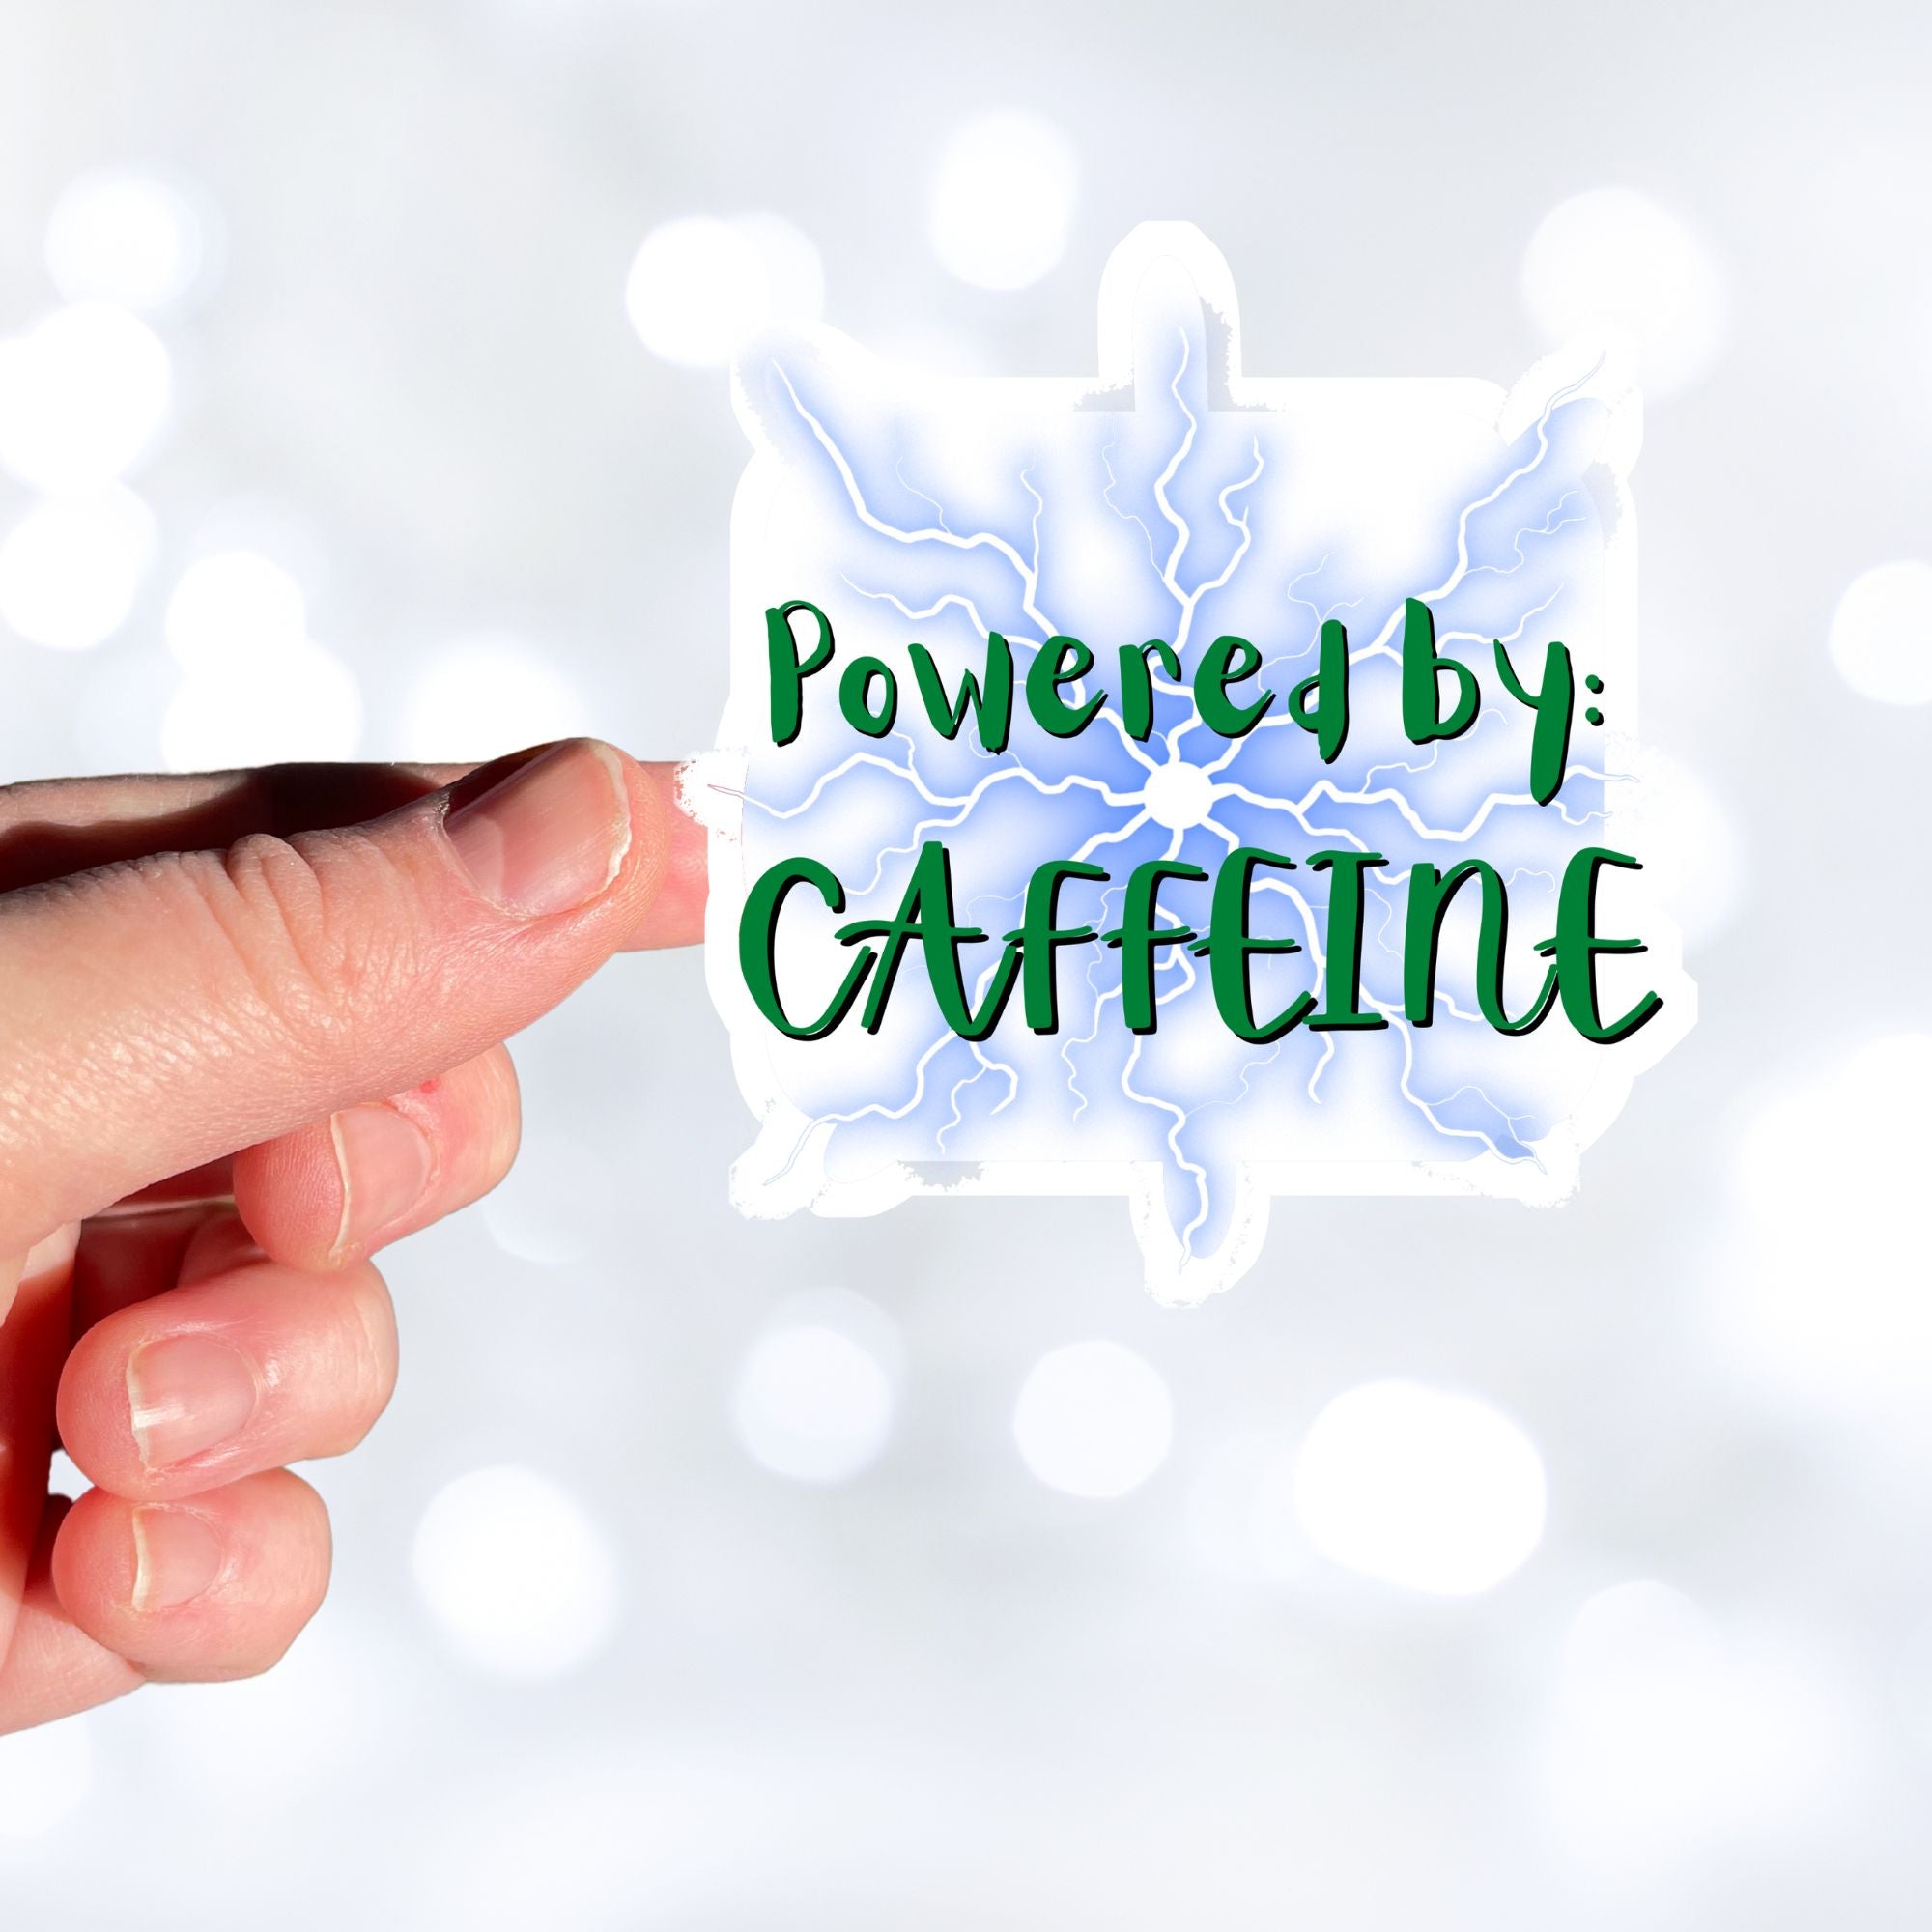 For those who like it, caffeine can be the magic elixir! This individual die-cut sticker has the words Powered by CAFFEINE in green over a background of blue electric/lightning bolts. This image shows a hand holding the Powered by Caffeine sticker.